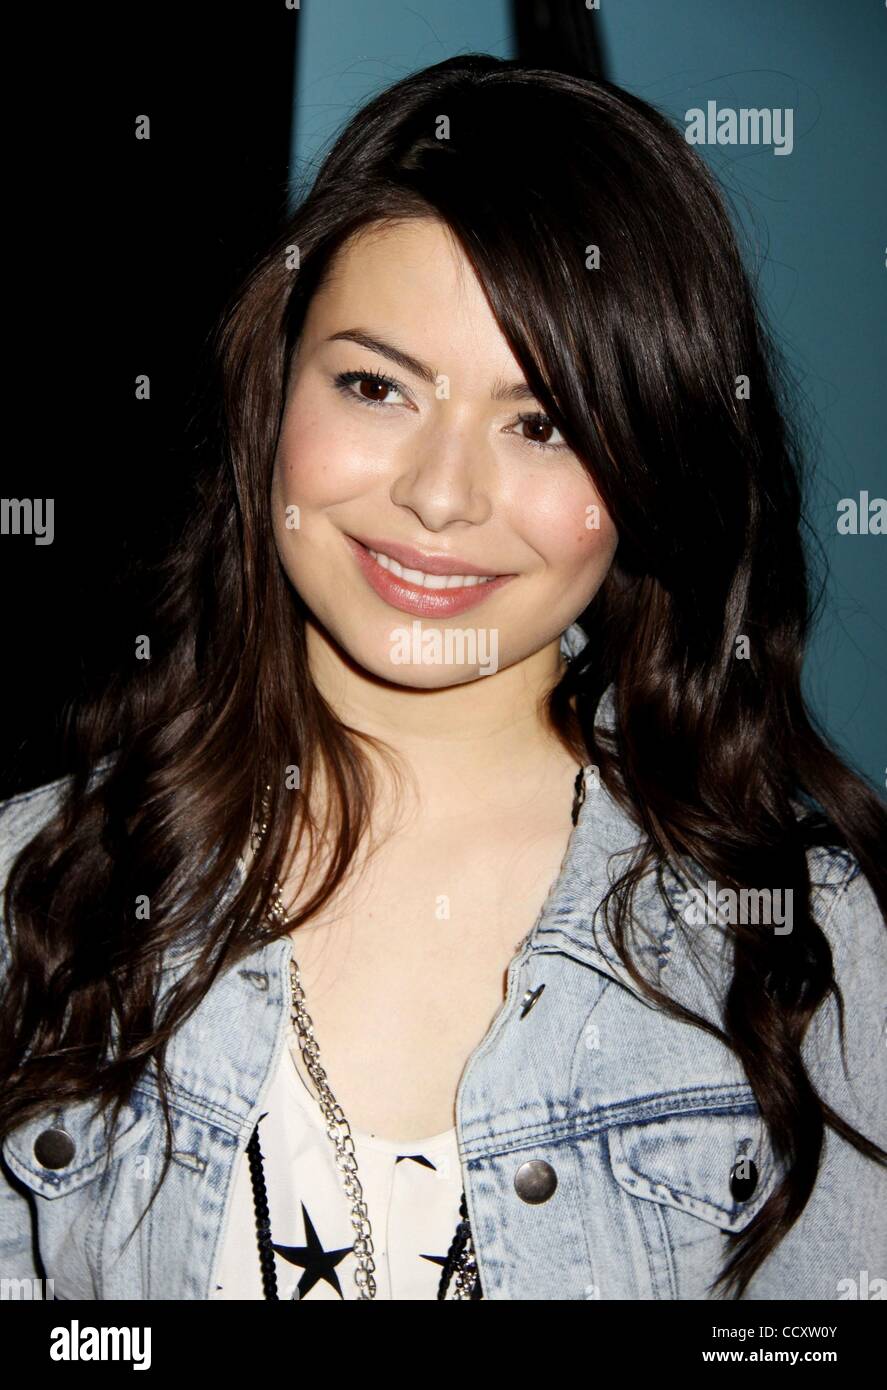 Mar 11, 2010 - New York, New York, USA - Singer and actress MIRANDA COSGROVE promotes 'Quaker Chewy Afterschool Rocks' campaign which calls attention for need afterschool programs held at PS 72 in Harlem. (Credit Image: Â© Nancy Kaszerman/ZUMA Press) Stock Photo